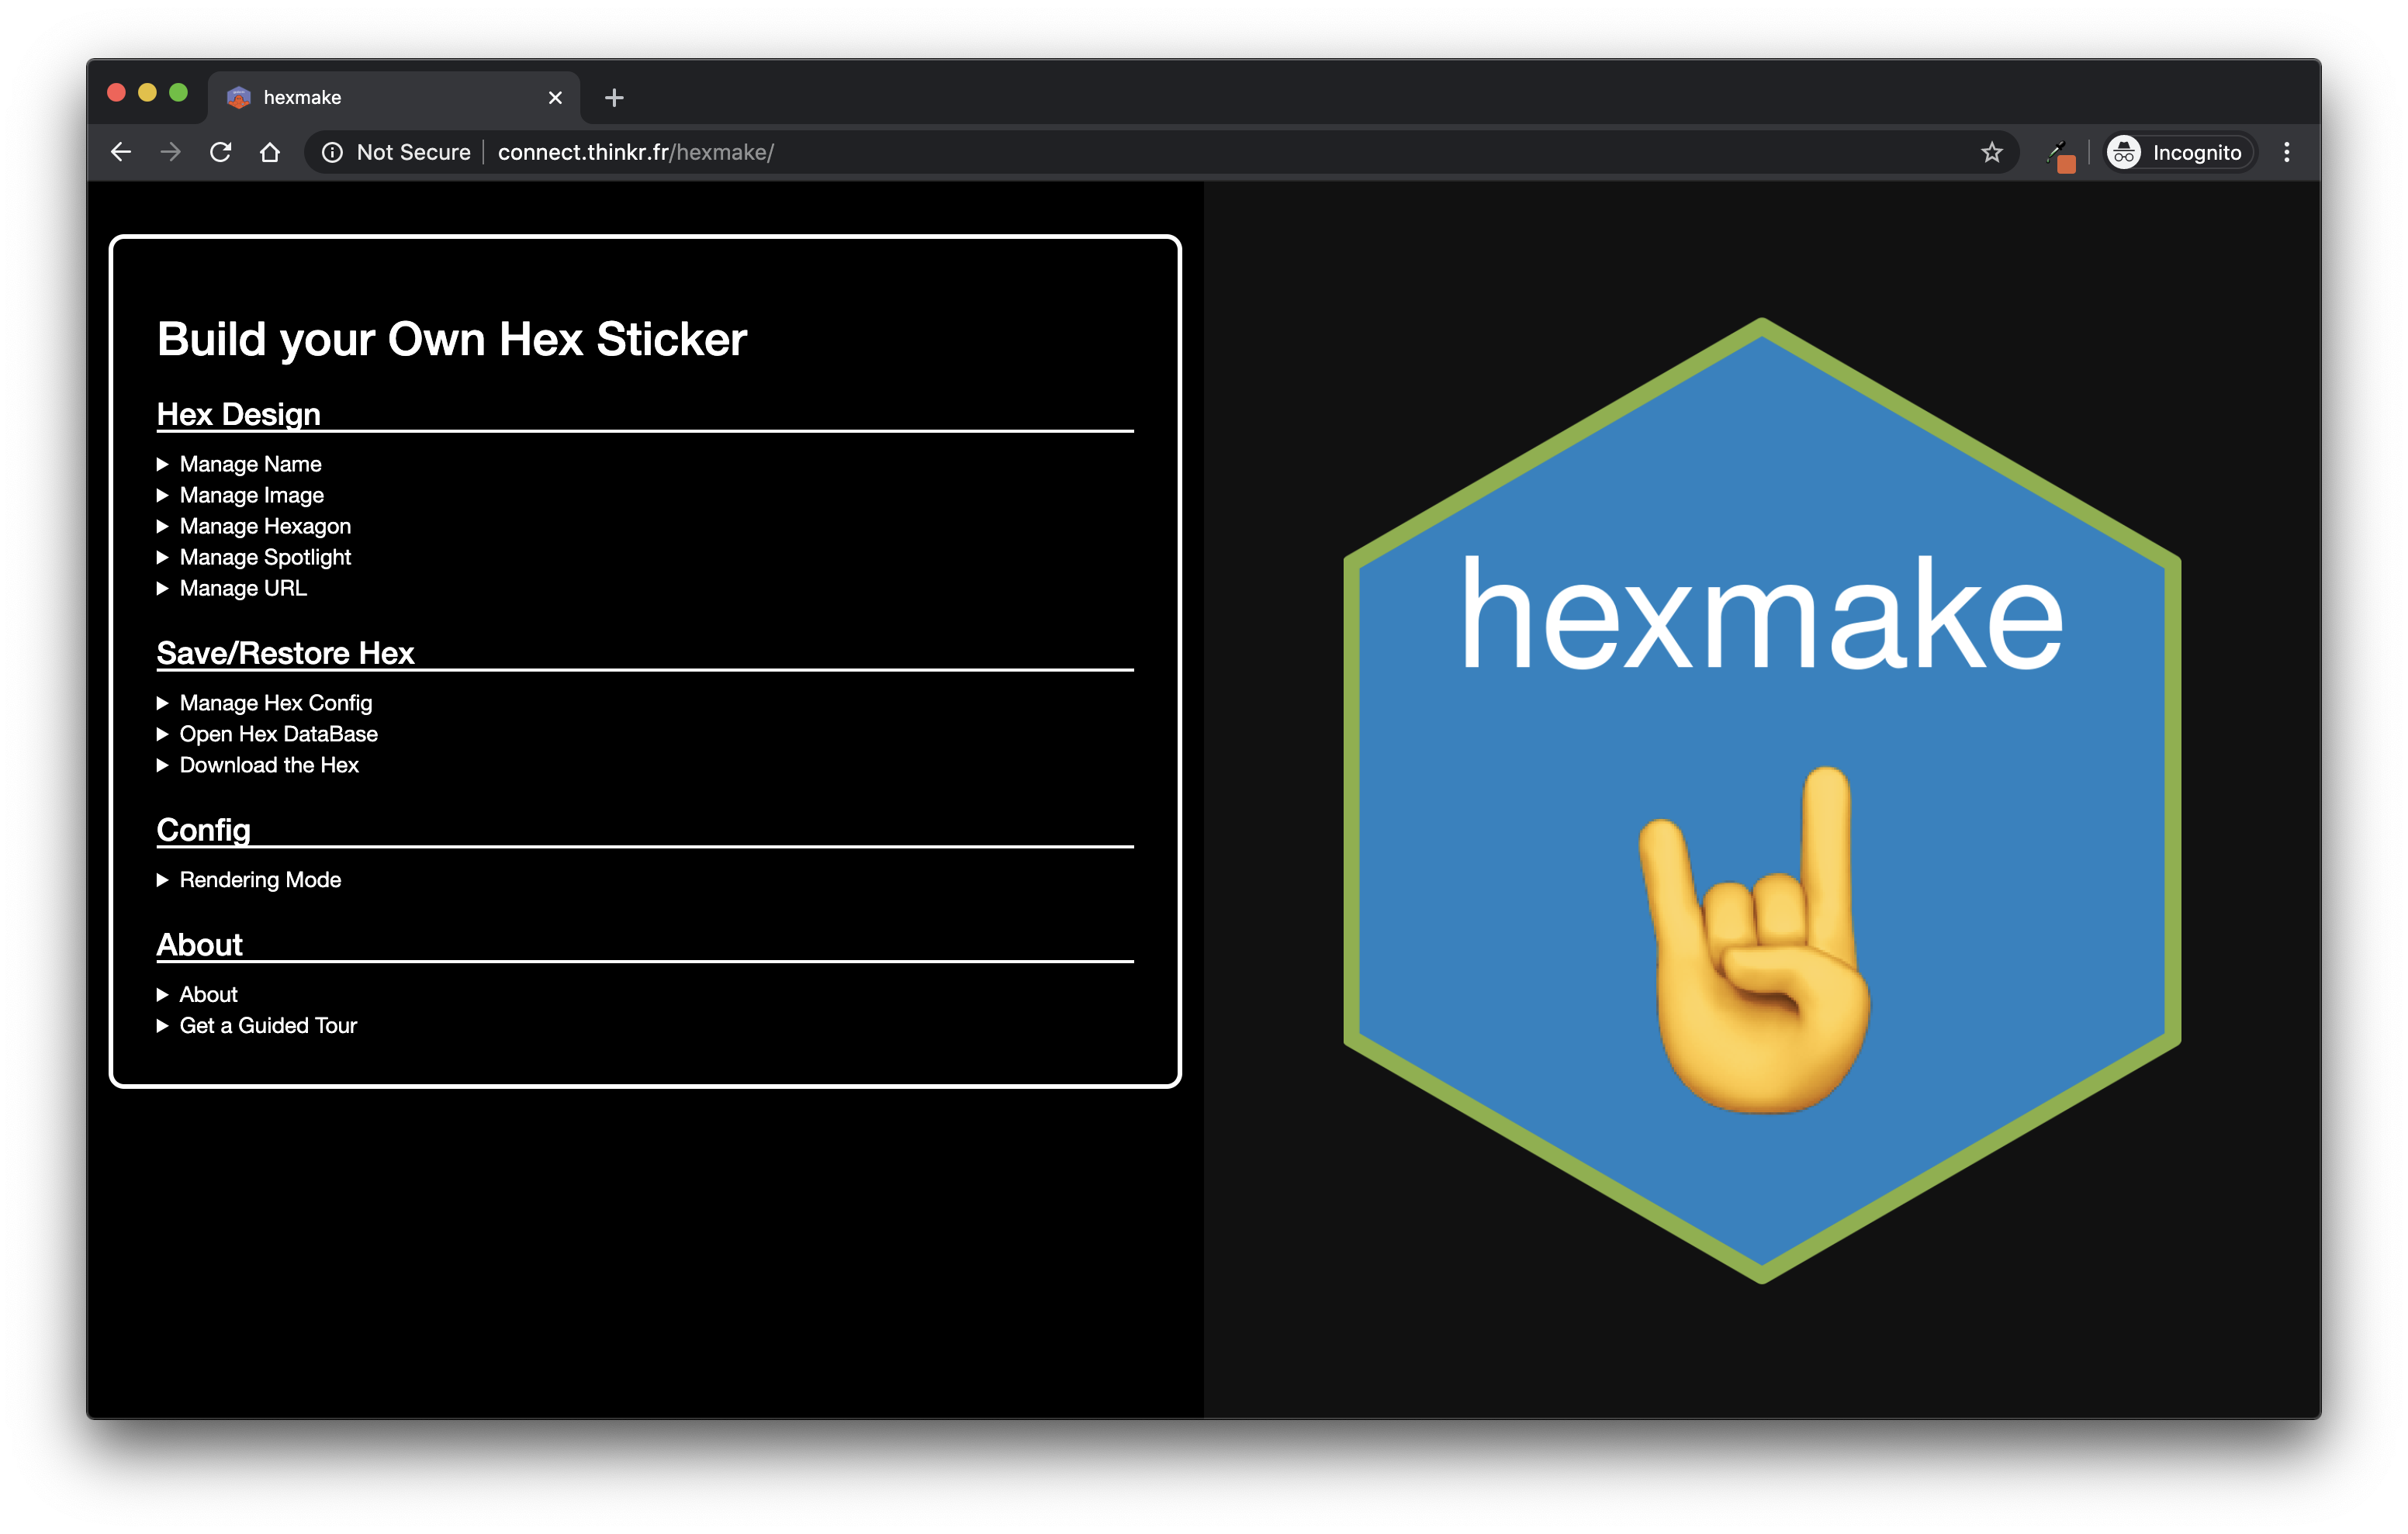 The {hexmake} application.